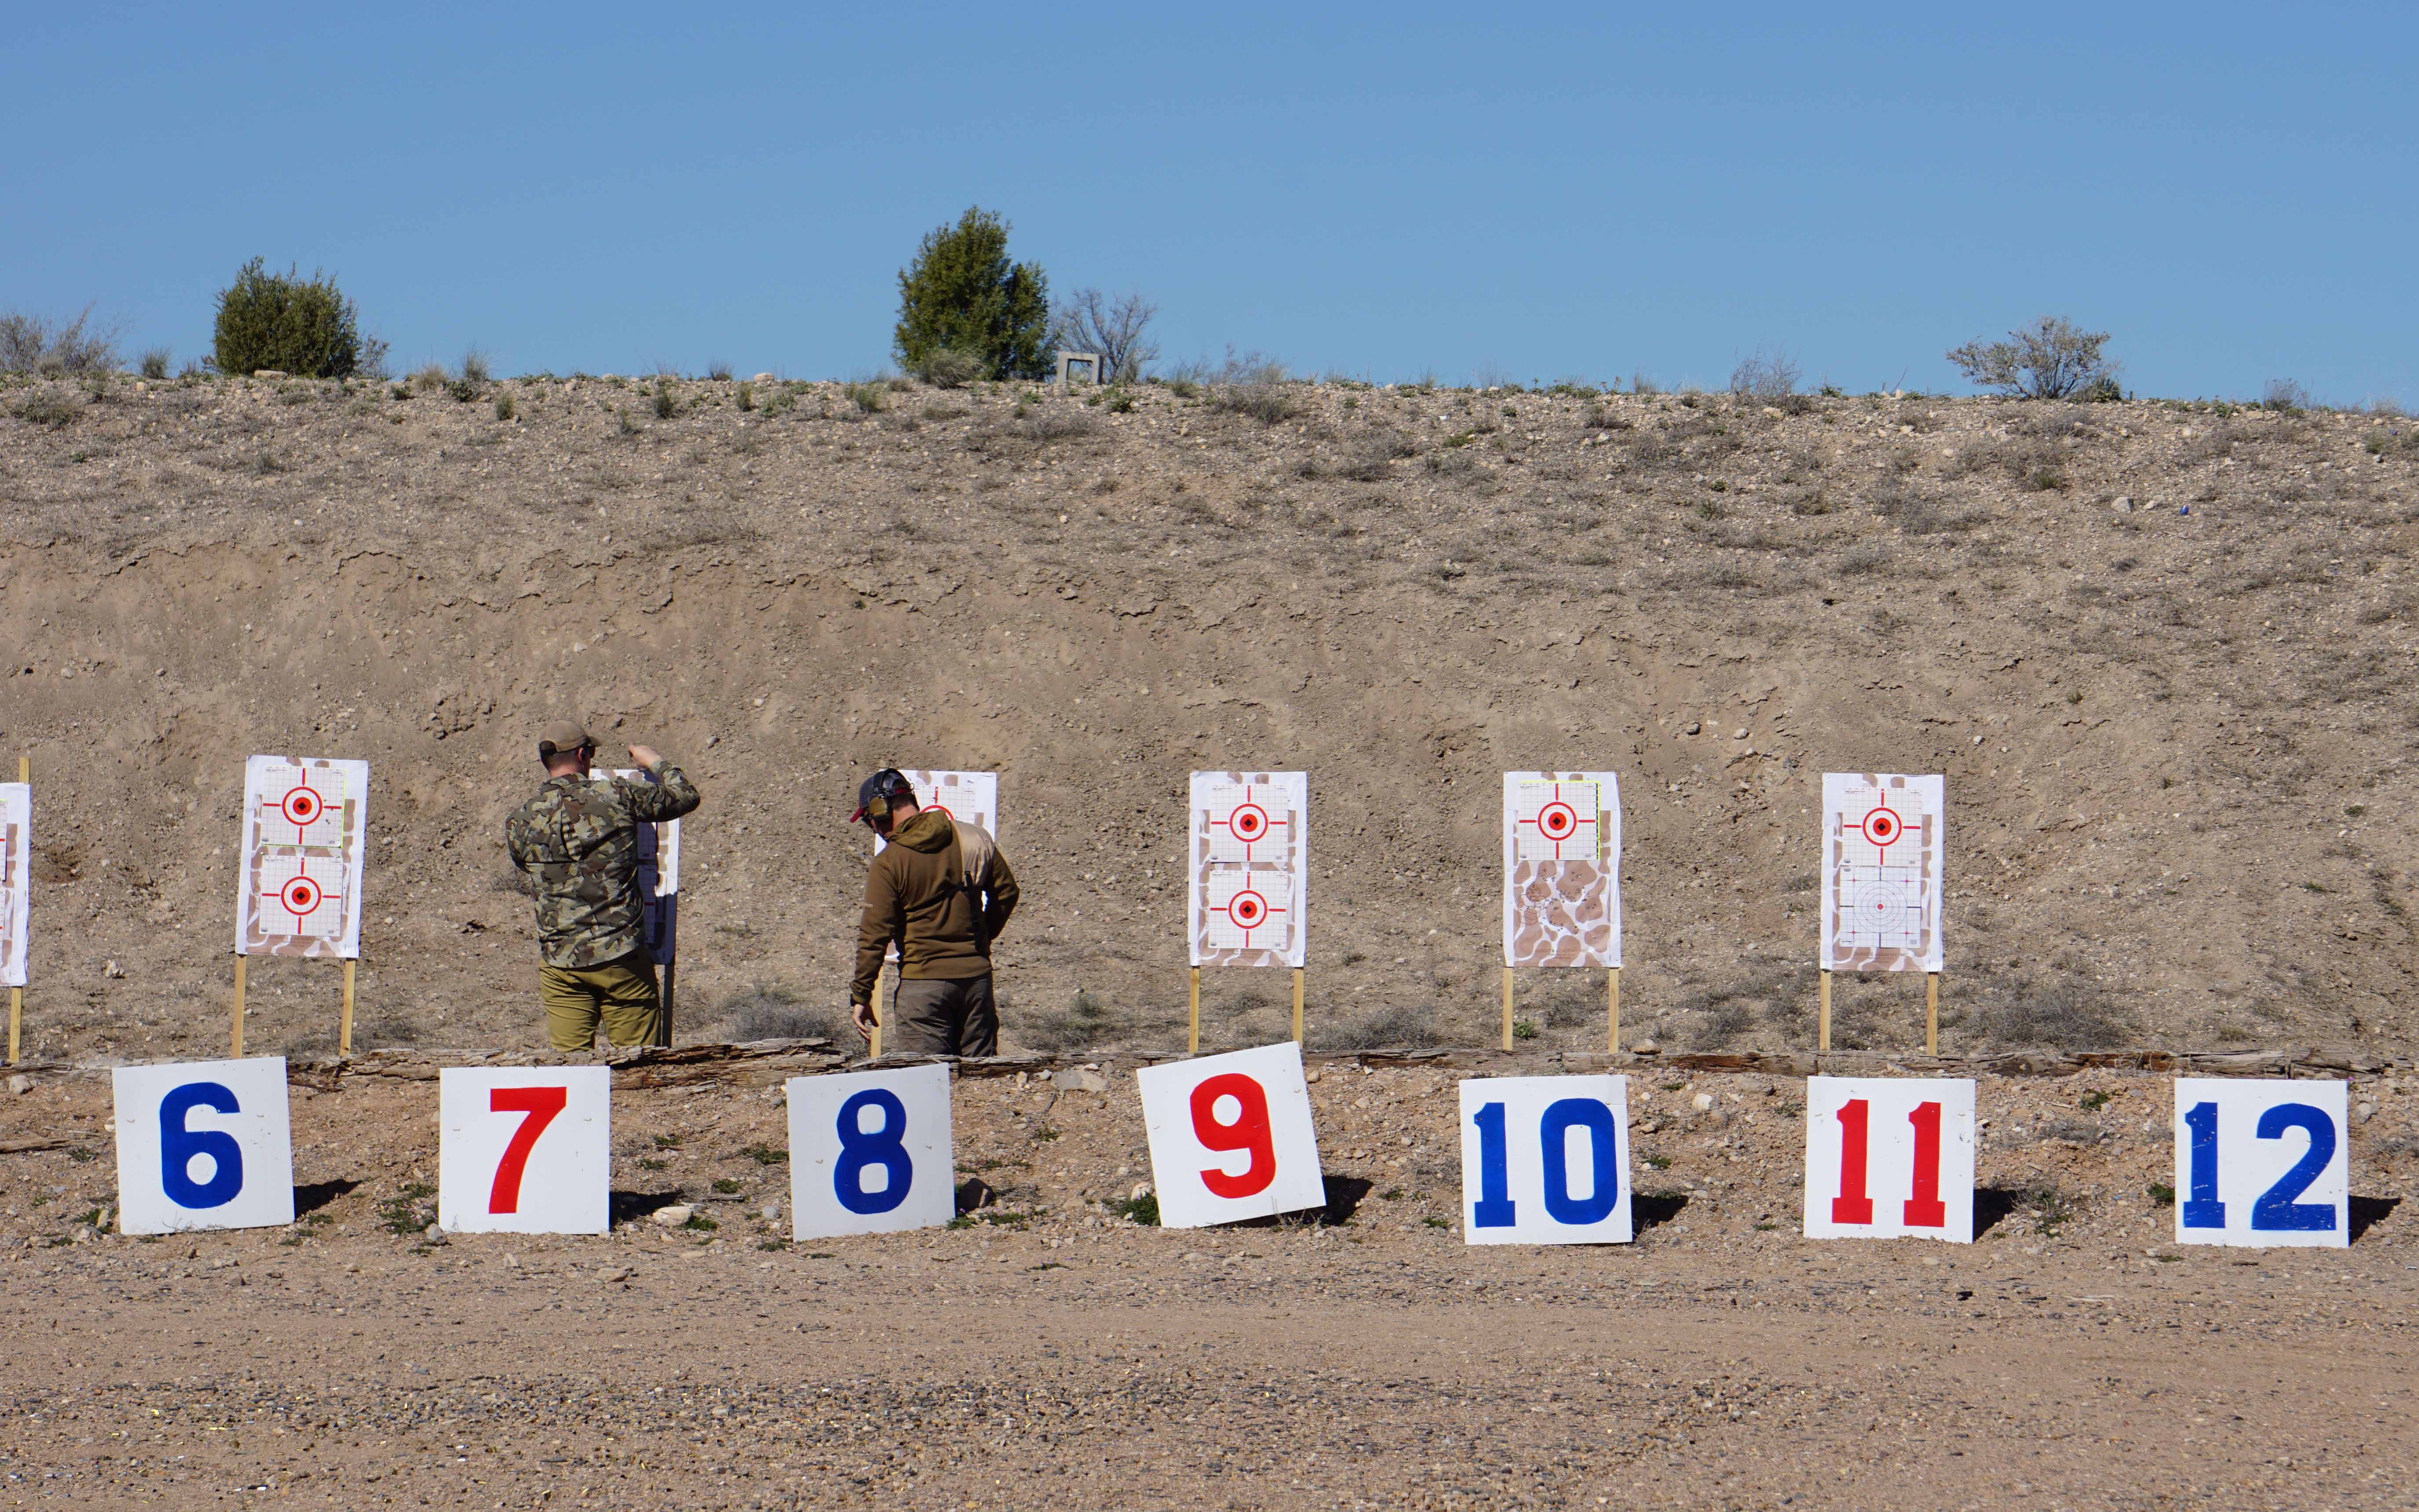 Two recreational shooters change targets.